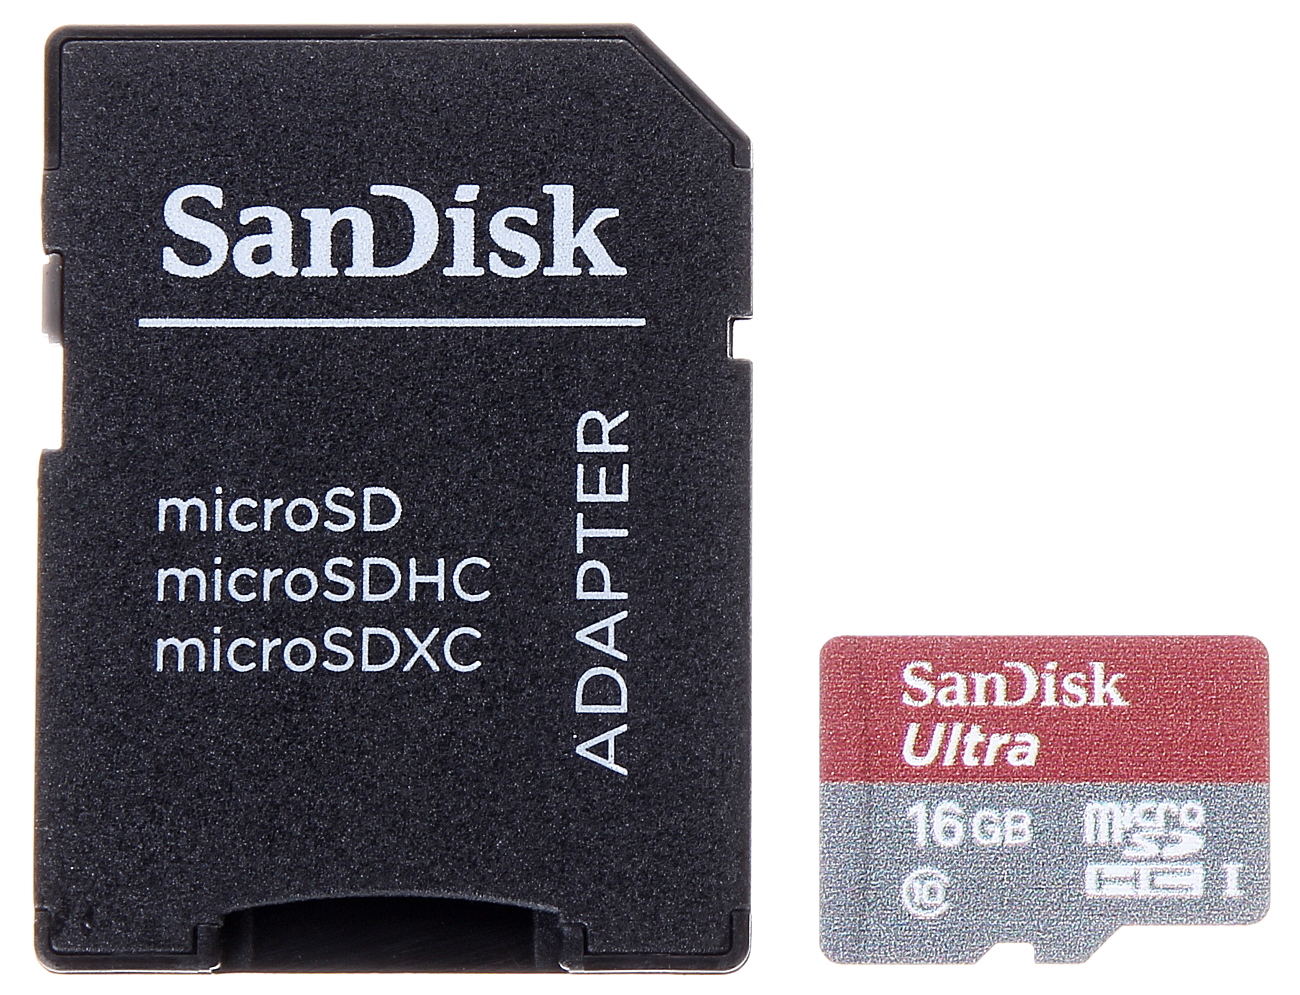 MEMORY CARD SD-MICRO-10/16-SAND UHS-I, SDHC 16 GB SAND... - Memory Cards -  Delta